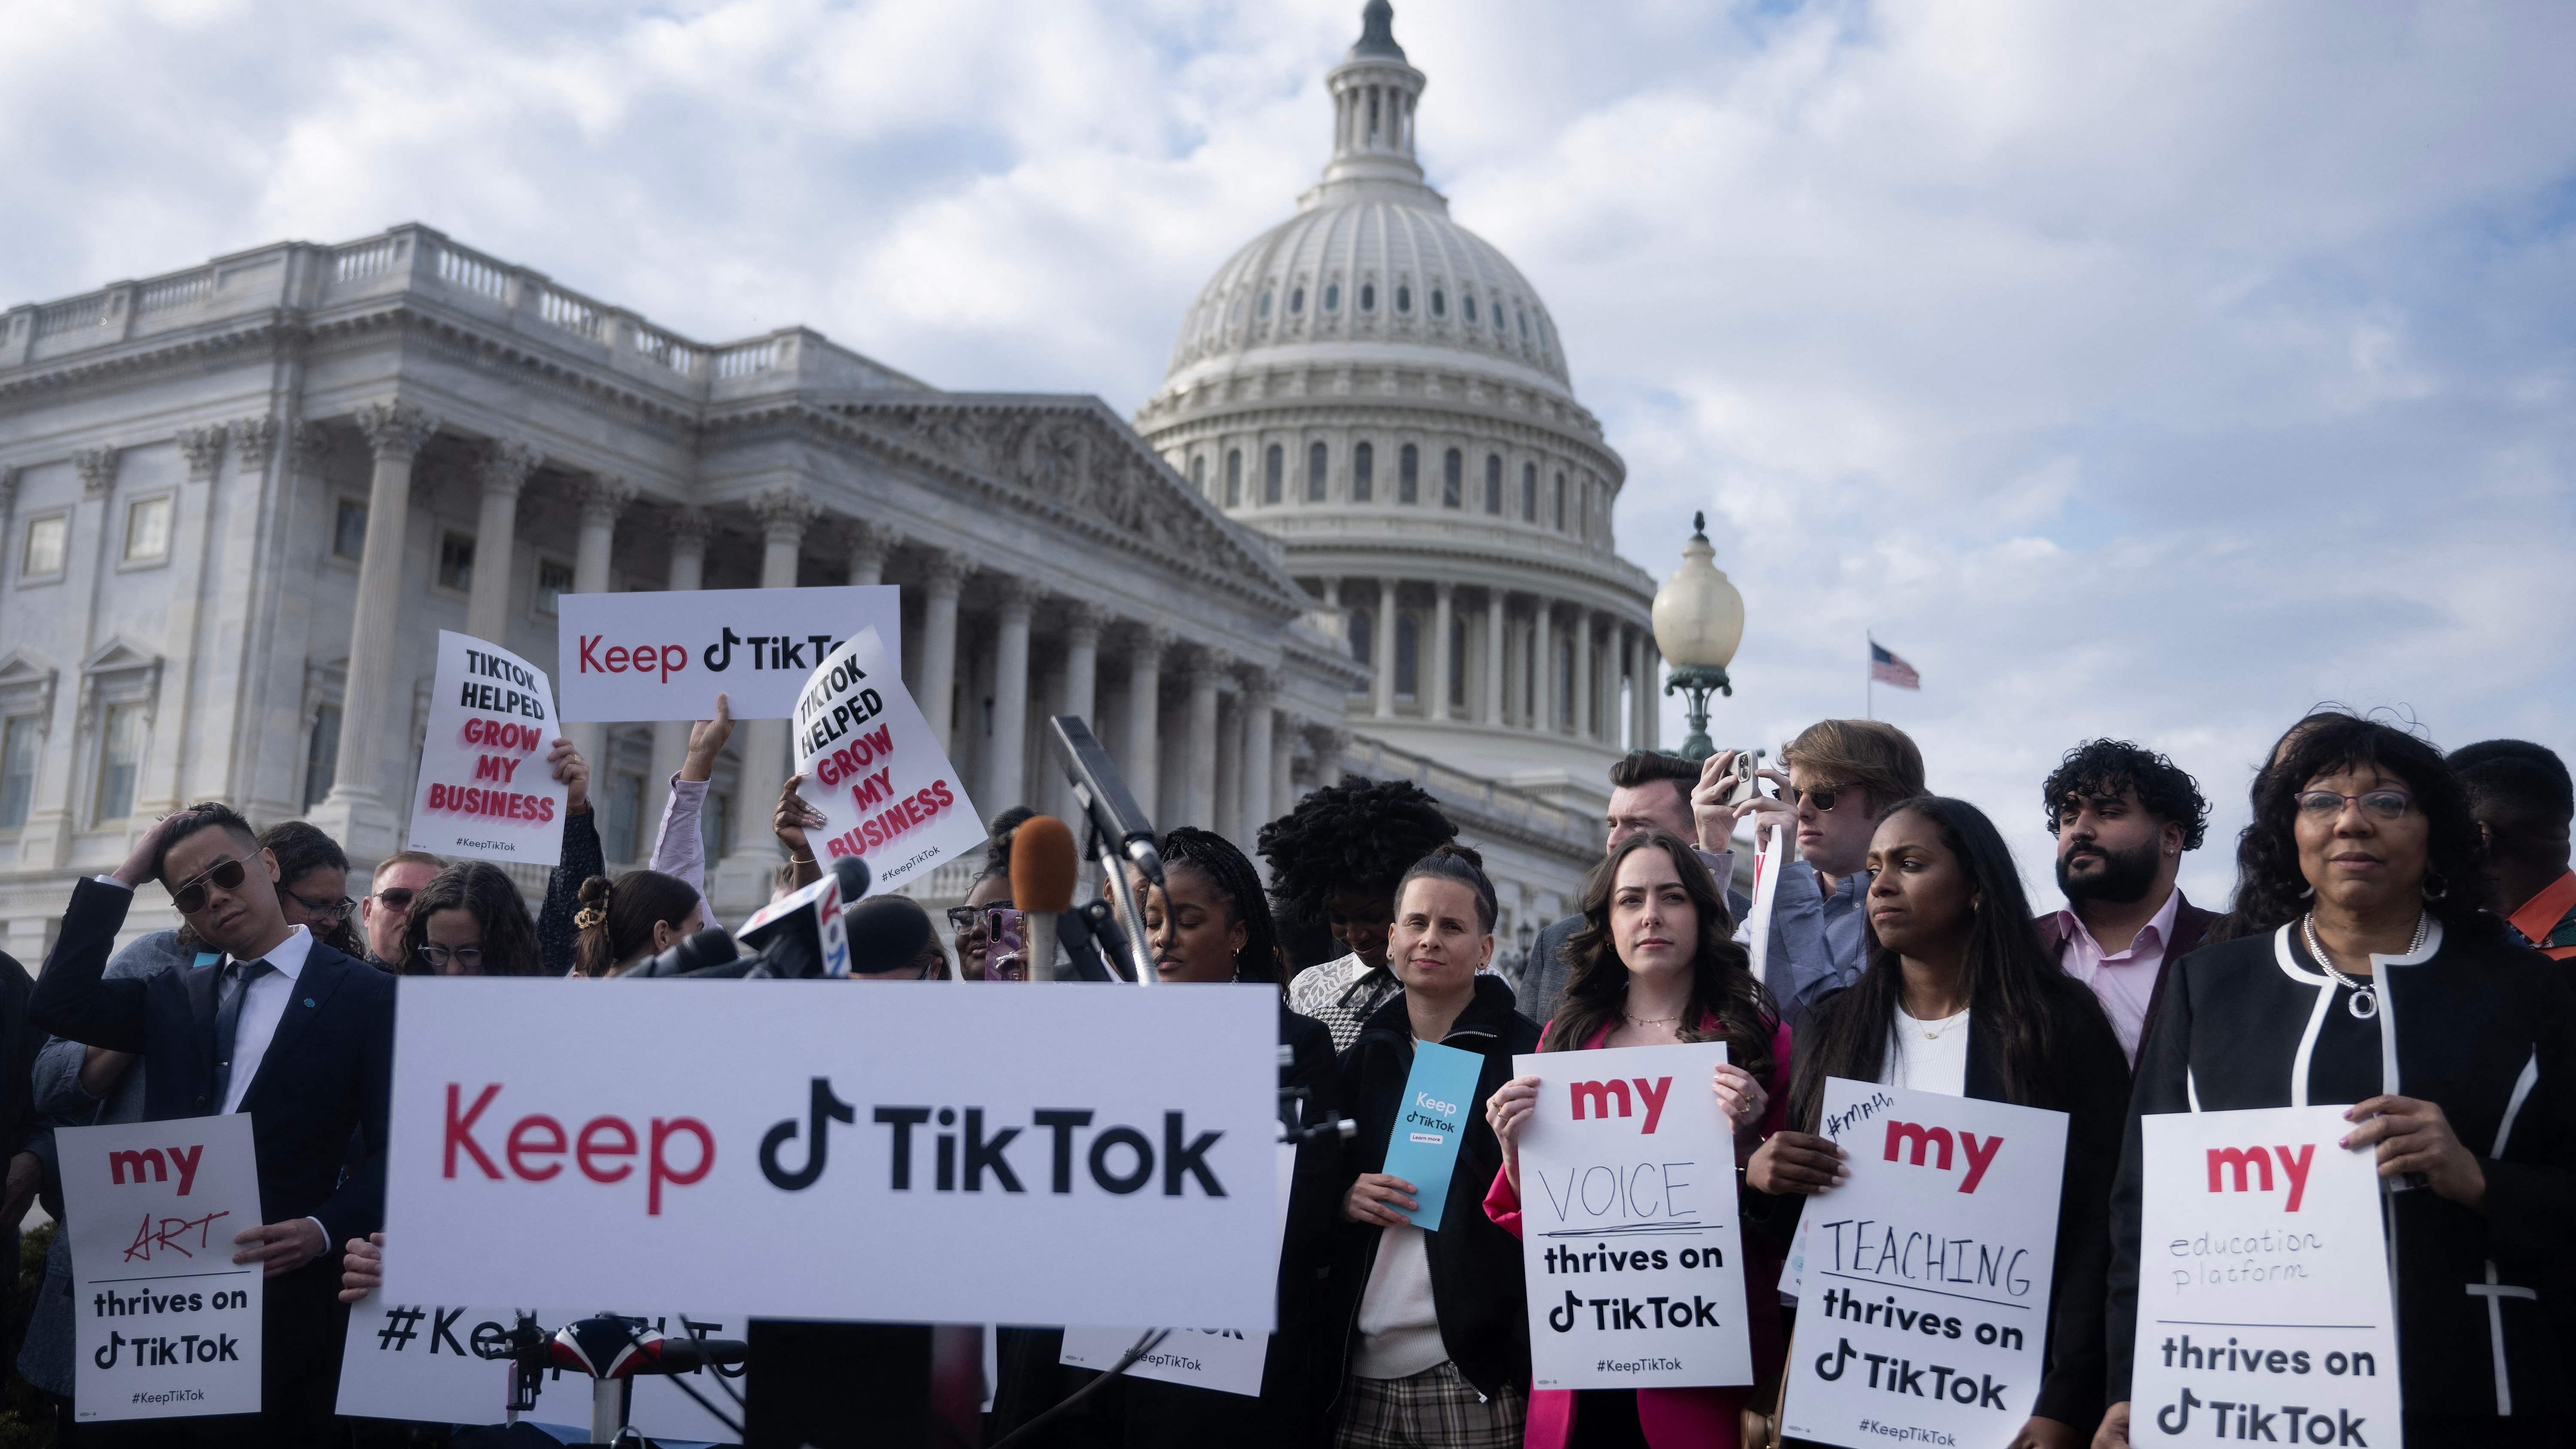 People gather for a press conference about their opposition to a TikTok ban on Capitol Hill in Washington, DC on March 22, 2023.